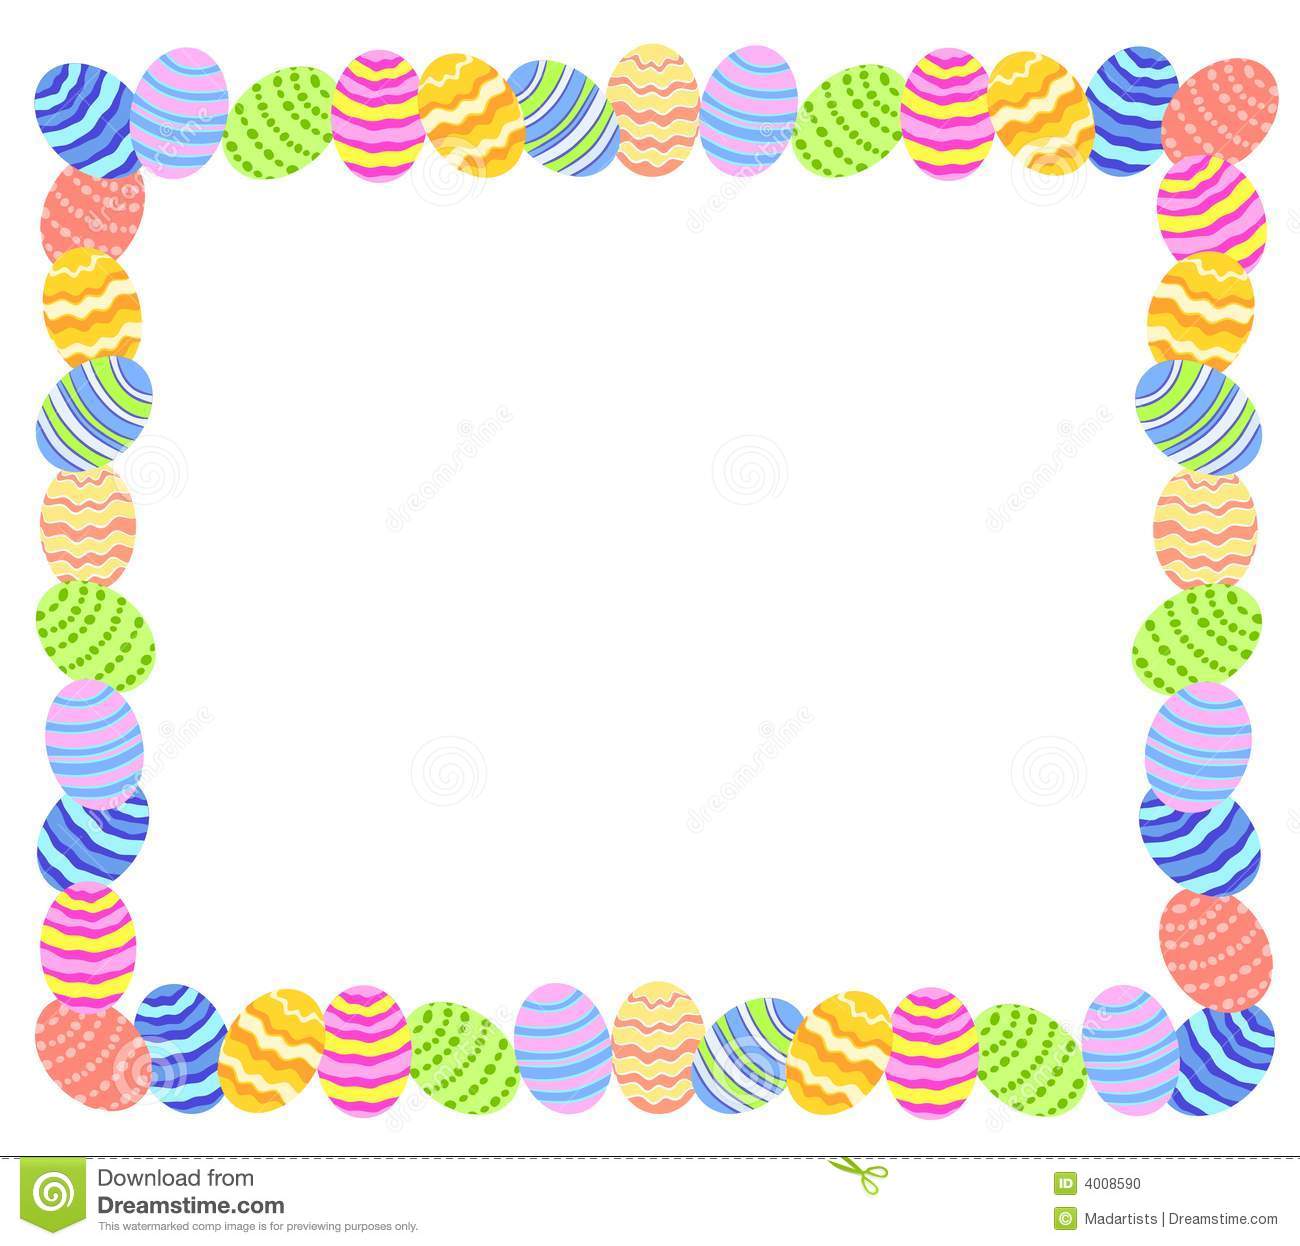     Frame Or Border Of Colourful Decorated Easter Eggs In Various Colors